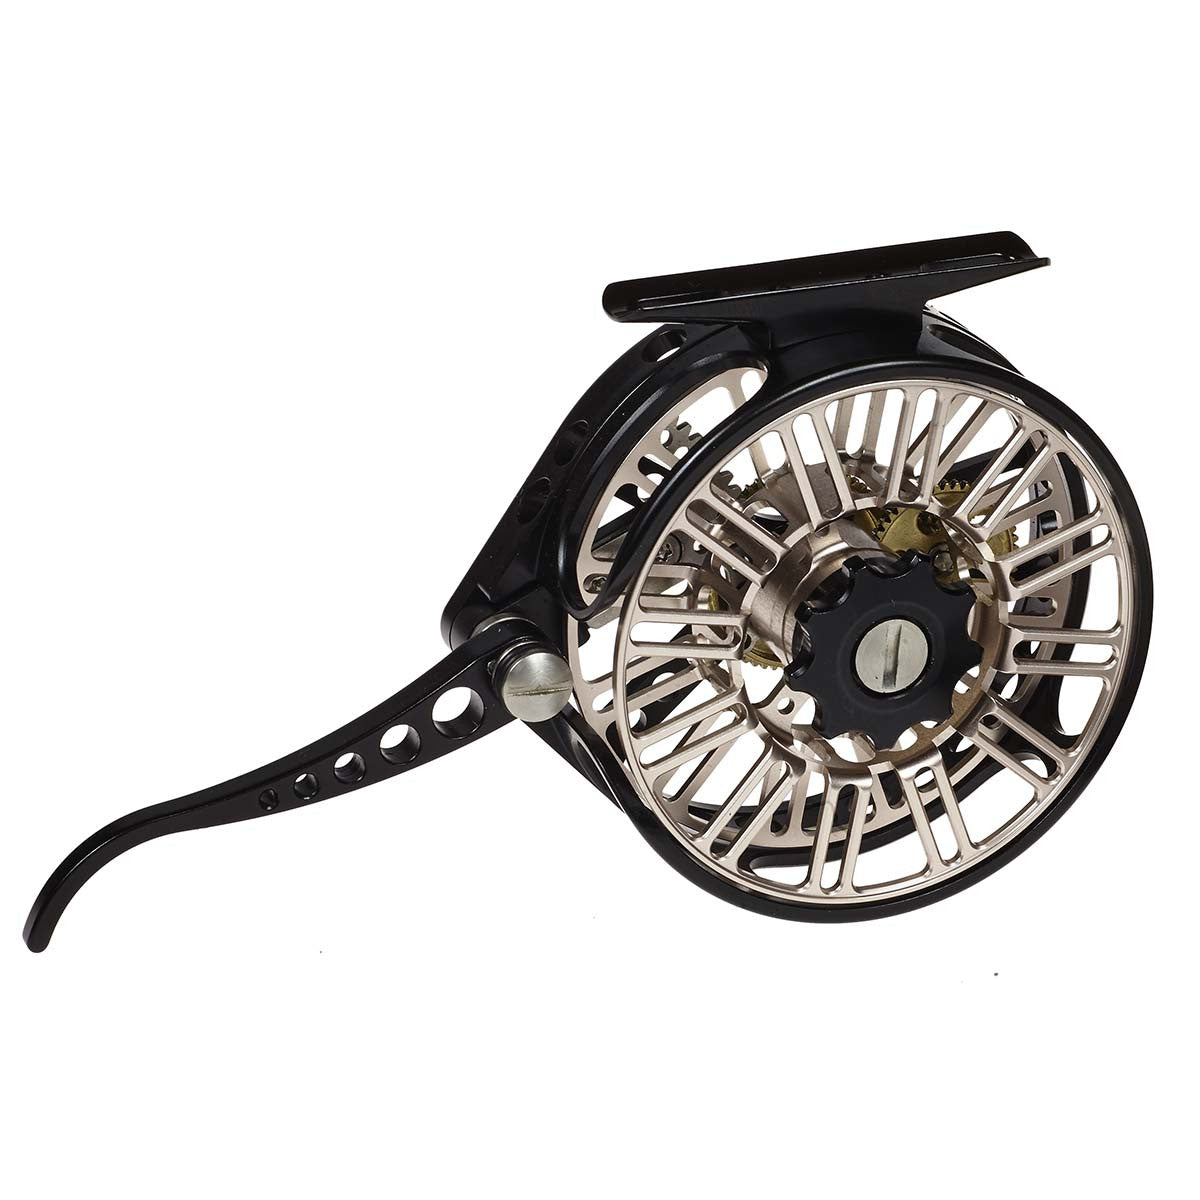 The Great Lakes of NYC: JMC OZONE Semi Automatic Fly Reel